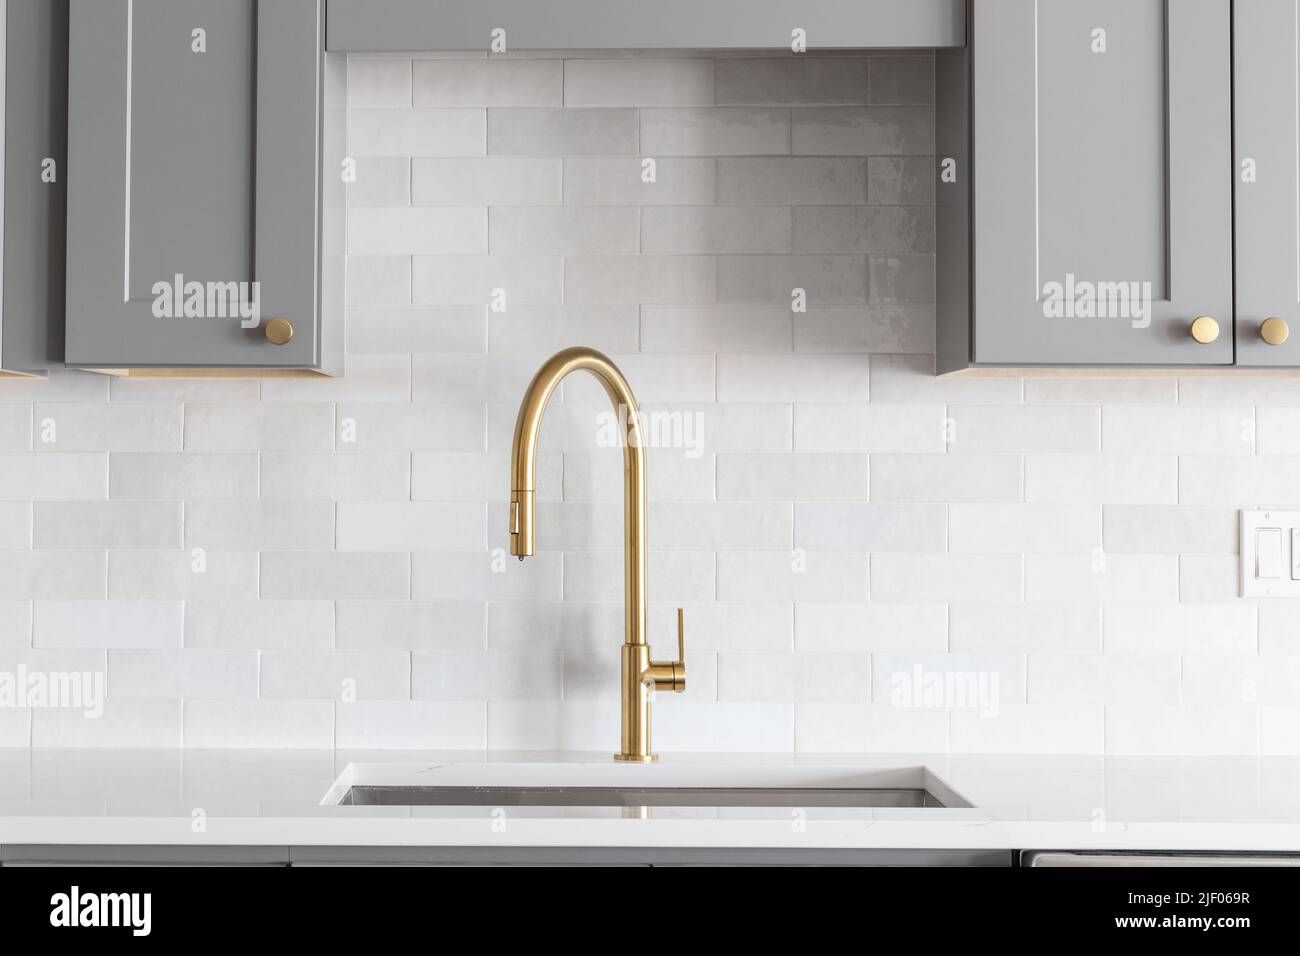 A kitchen sink detail shot with a gold faucet, marble backsplash, grey cabinets, and gold hardware. Stock Photo